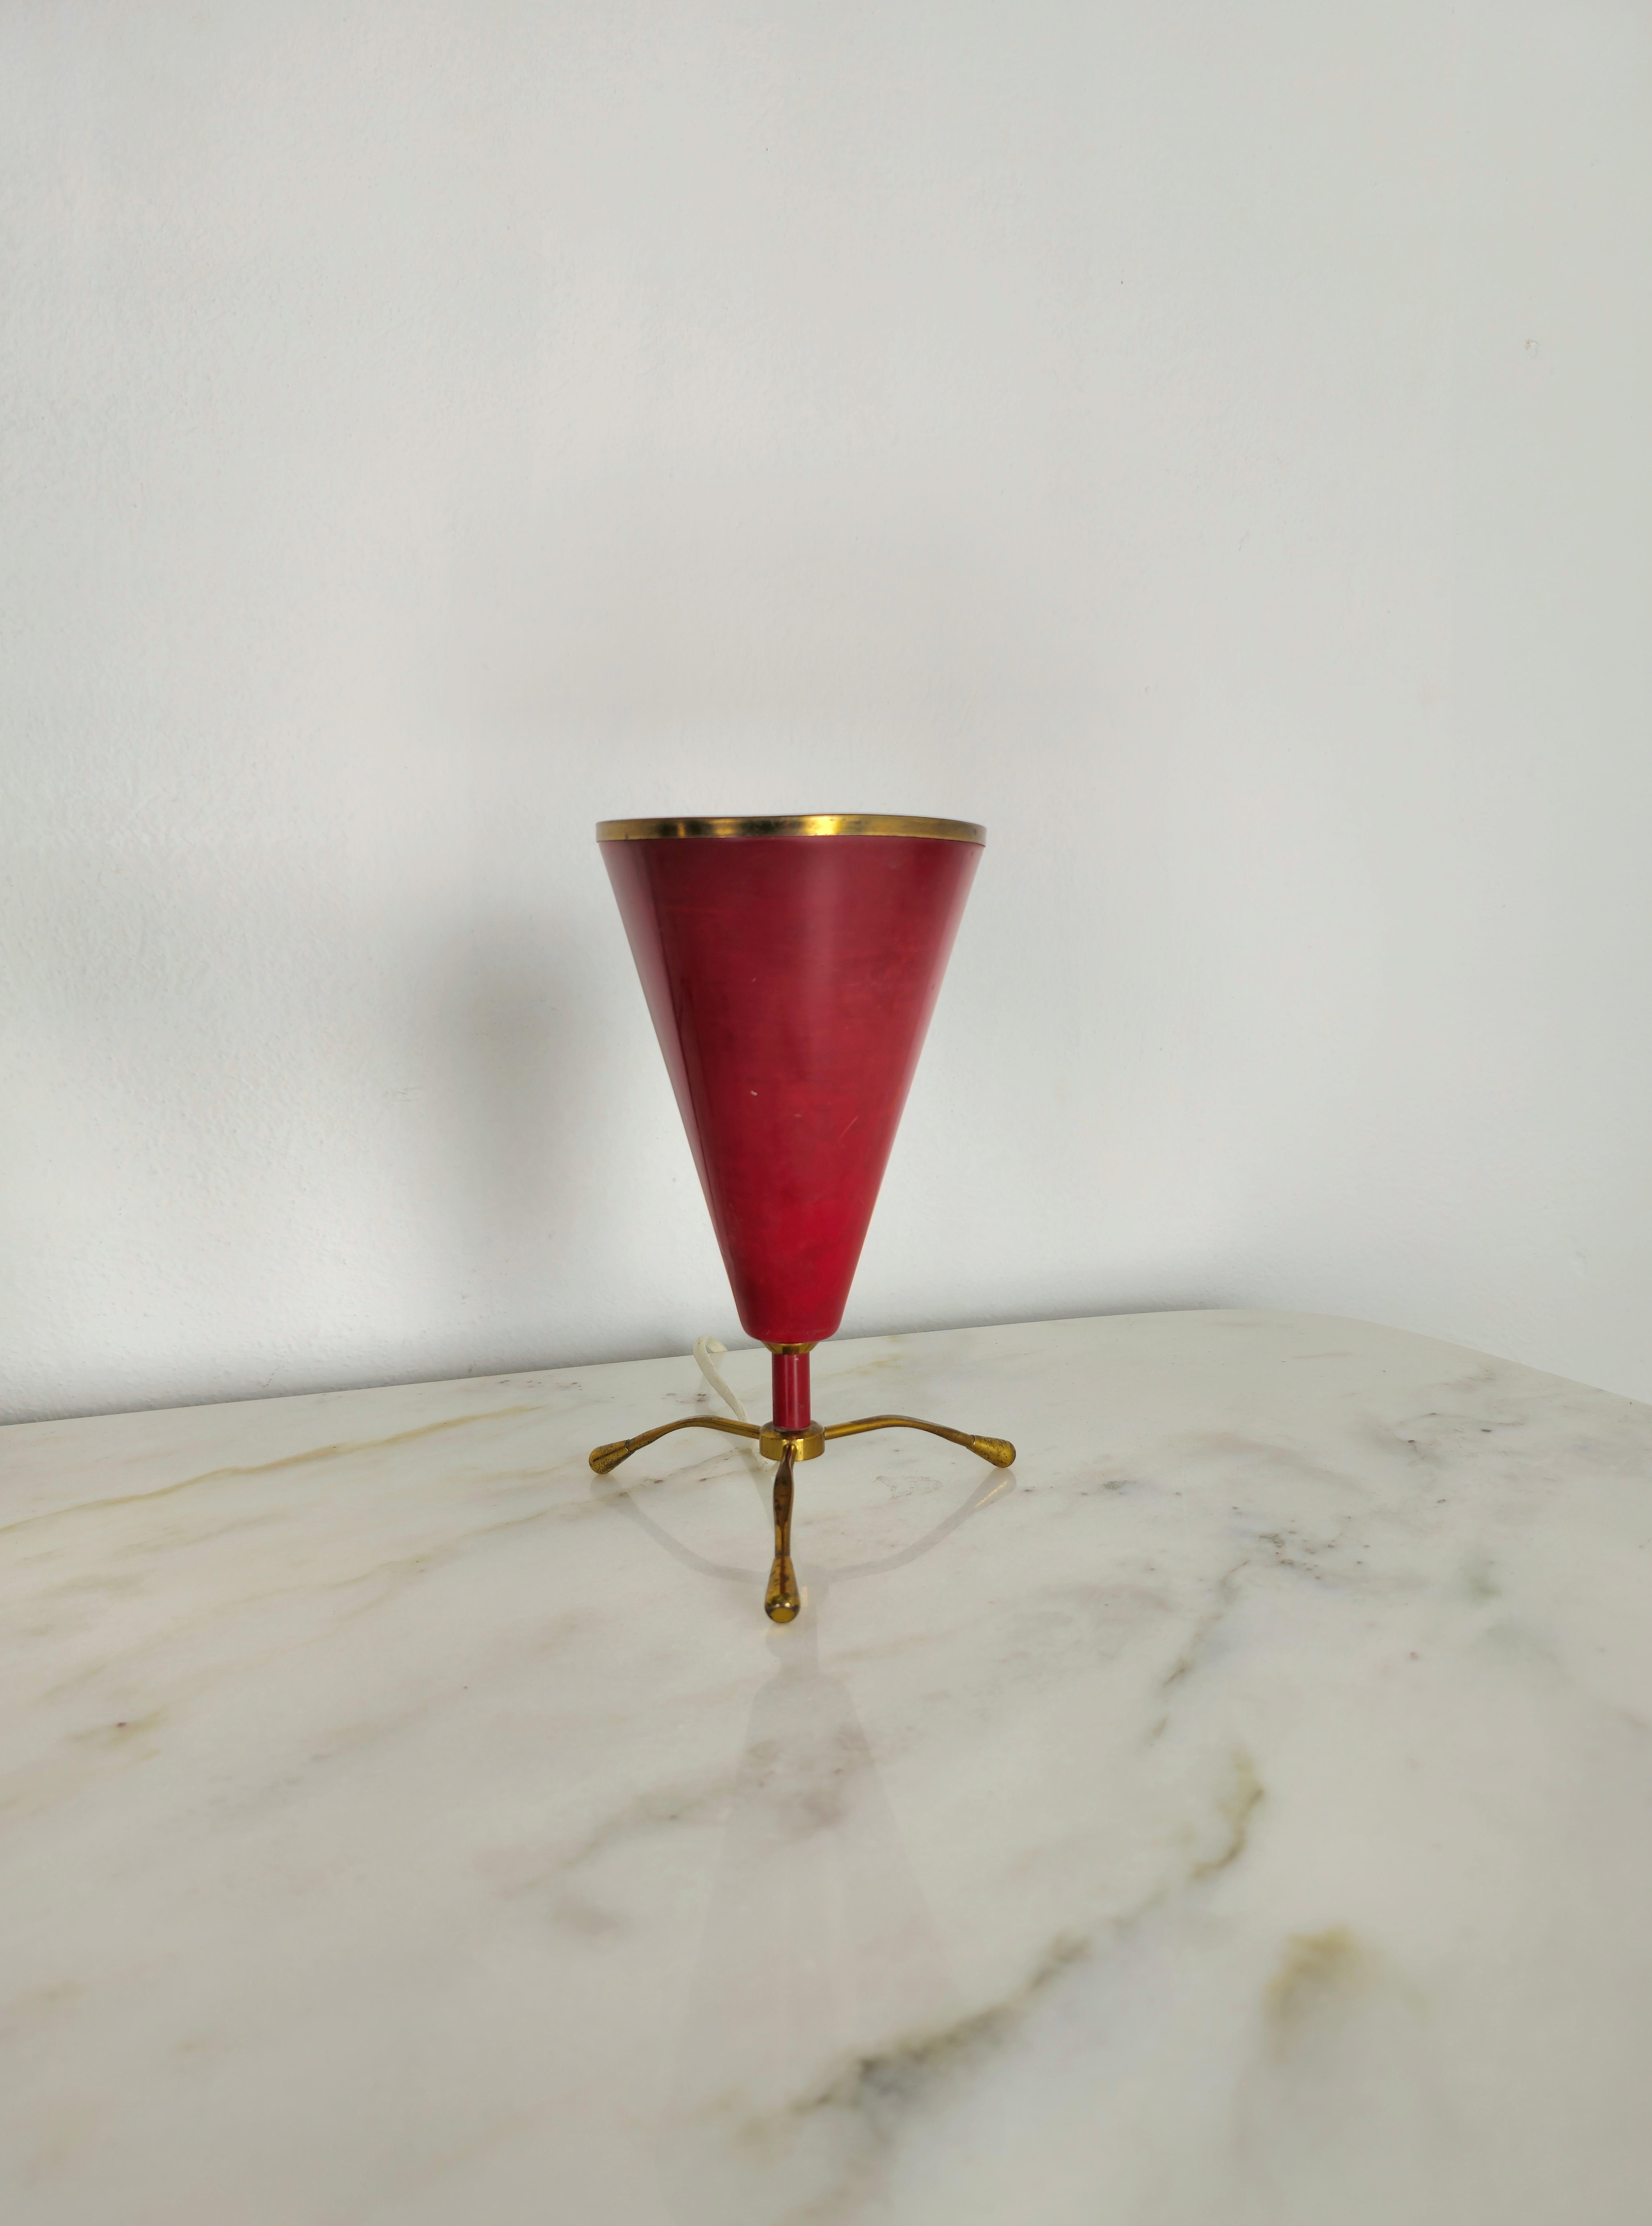 Table lamp attributable to Arredoluce, produced in Italy in the 1950s.
E14 single light table lamp with conical red lacquered aluminum diffuser, border and 3 brass feet.



Note: We try to offer our customers an excellent service even in shipments